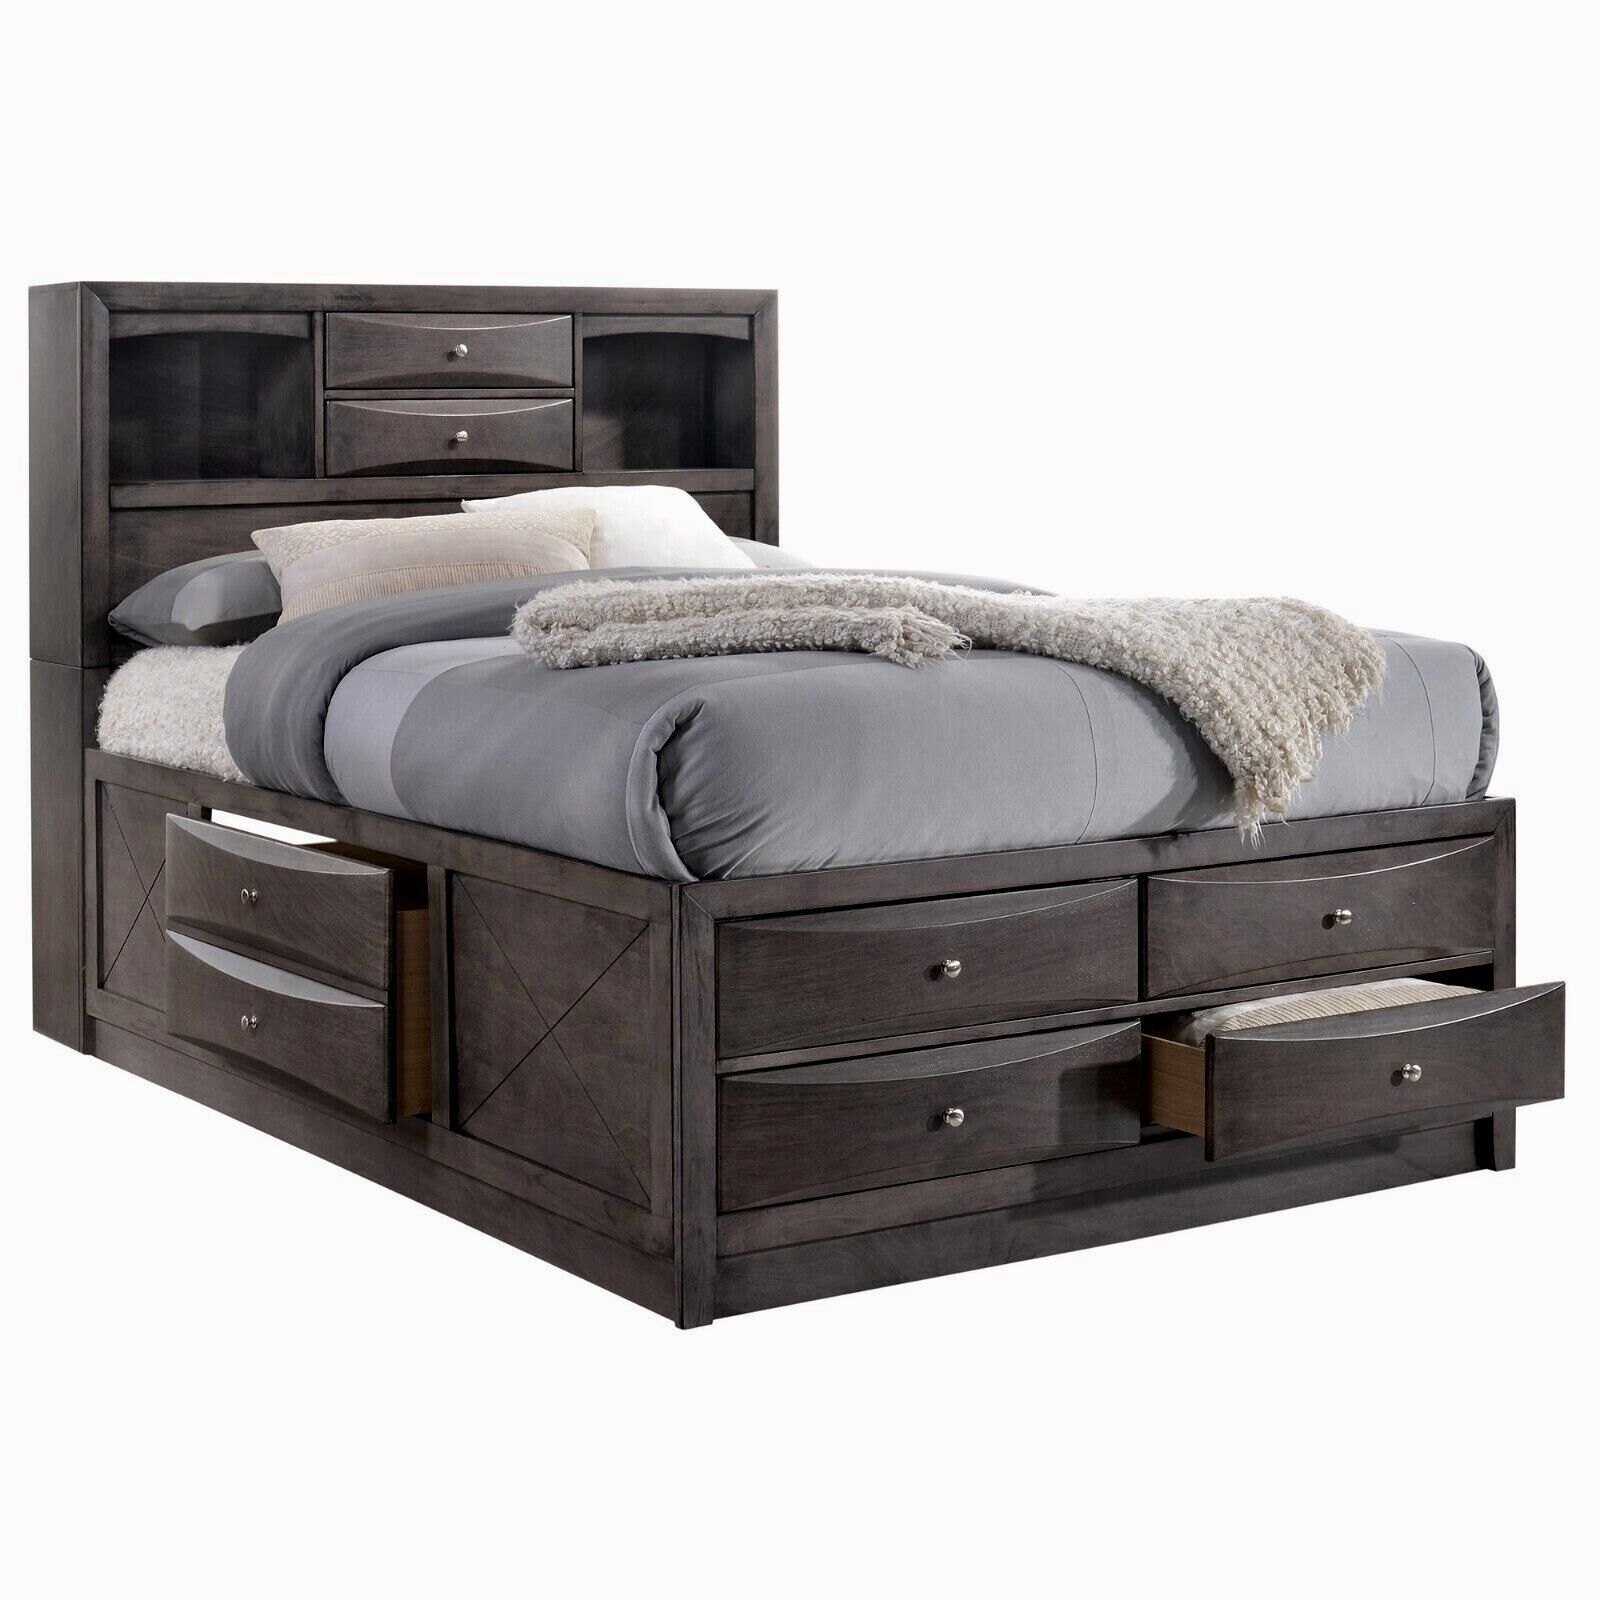 Emilia Transitional Queen Bookcase Bed with 8 Storage Drawers In Grey